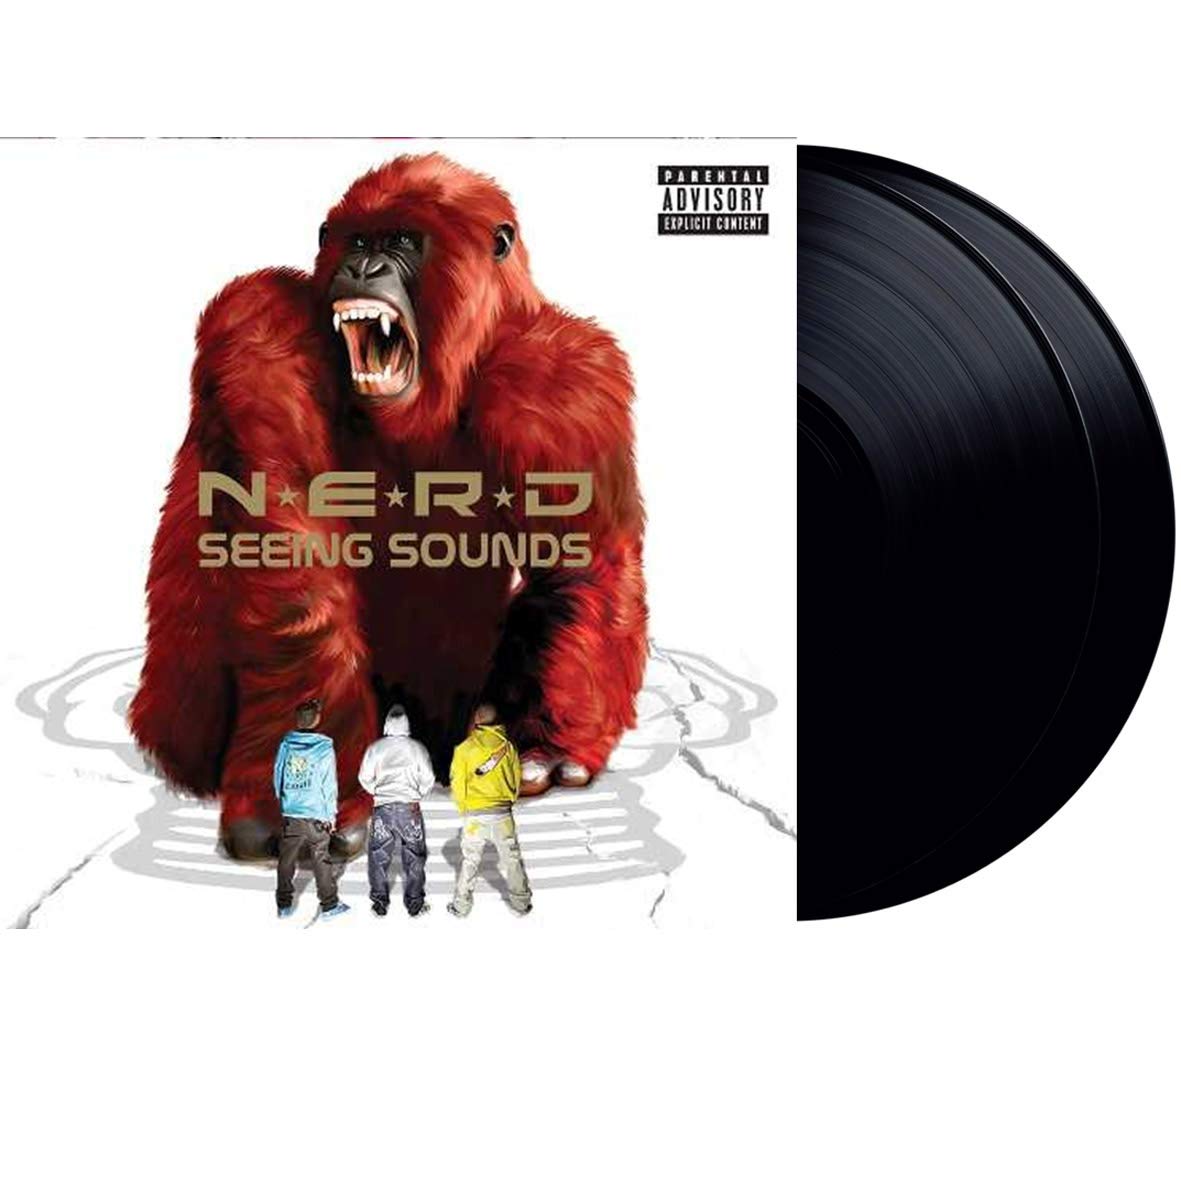 CD Shop - N.E.R.D SEEING SOUNDS